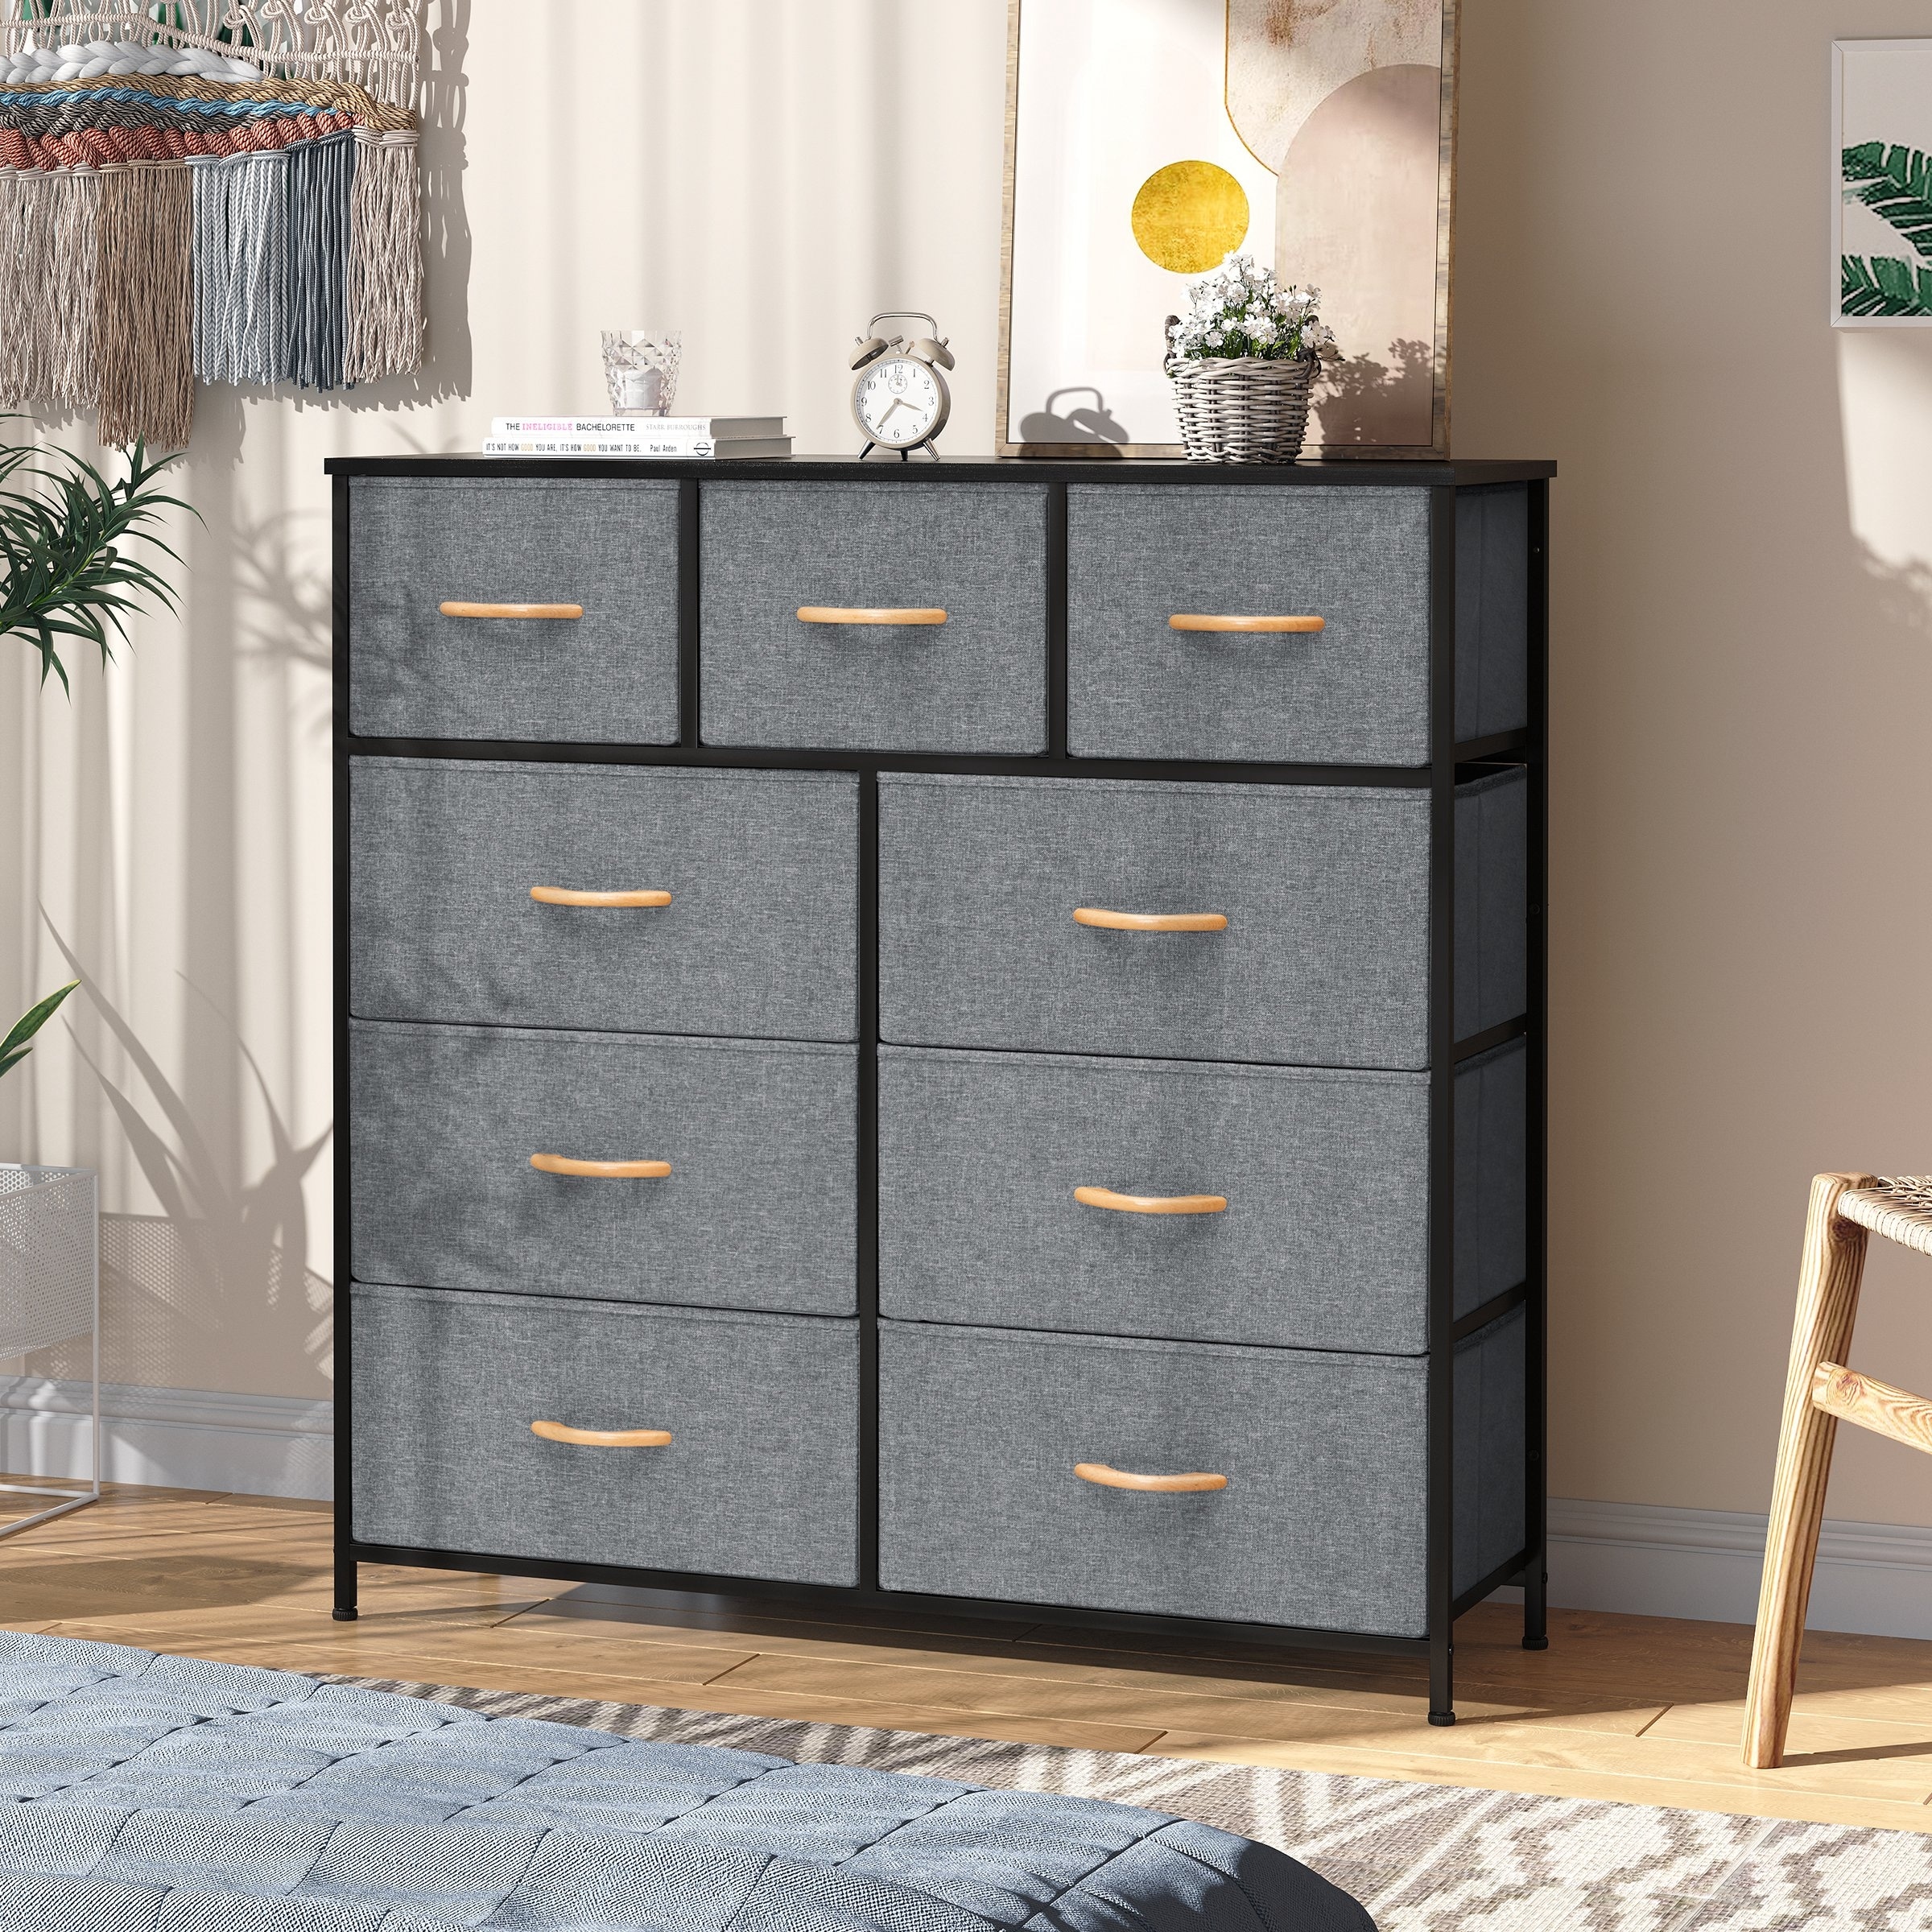 https://ak1.ostkcdn.com/images/products/is/images/direct/9b753a5c75e75d75a5d07b93e4a09aafa4704305/Home-Extra-Wide-Closet-Dresser-Storage-Tower-Organizer-Unit-9-Drawers.jpg